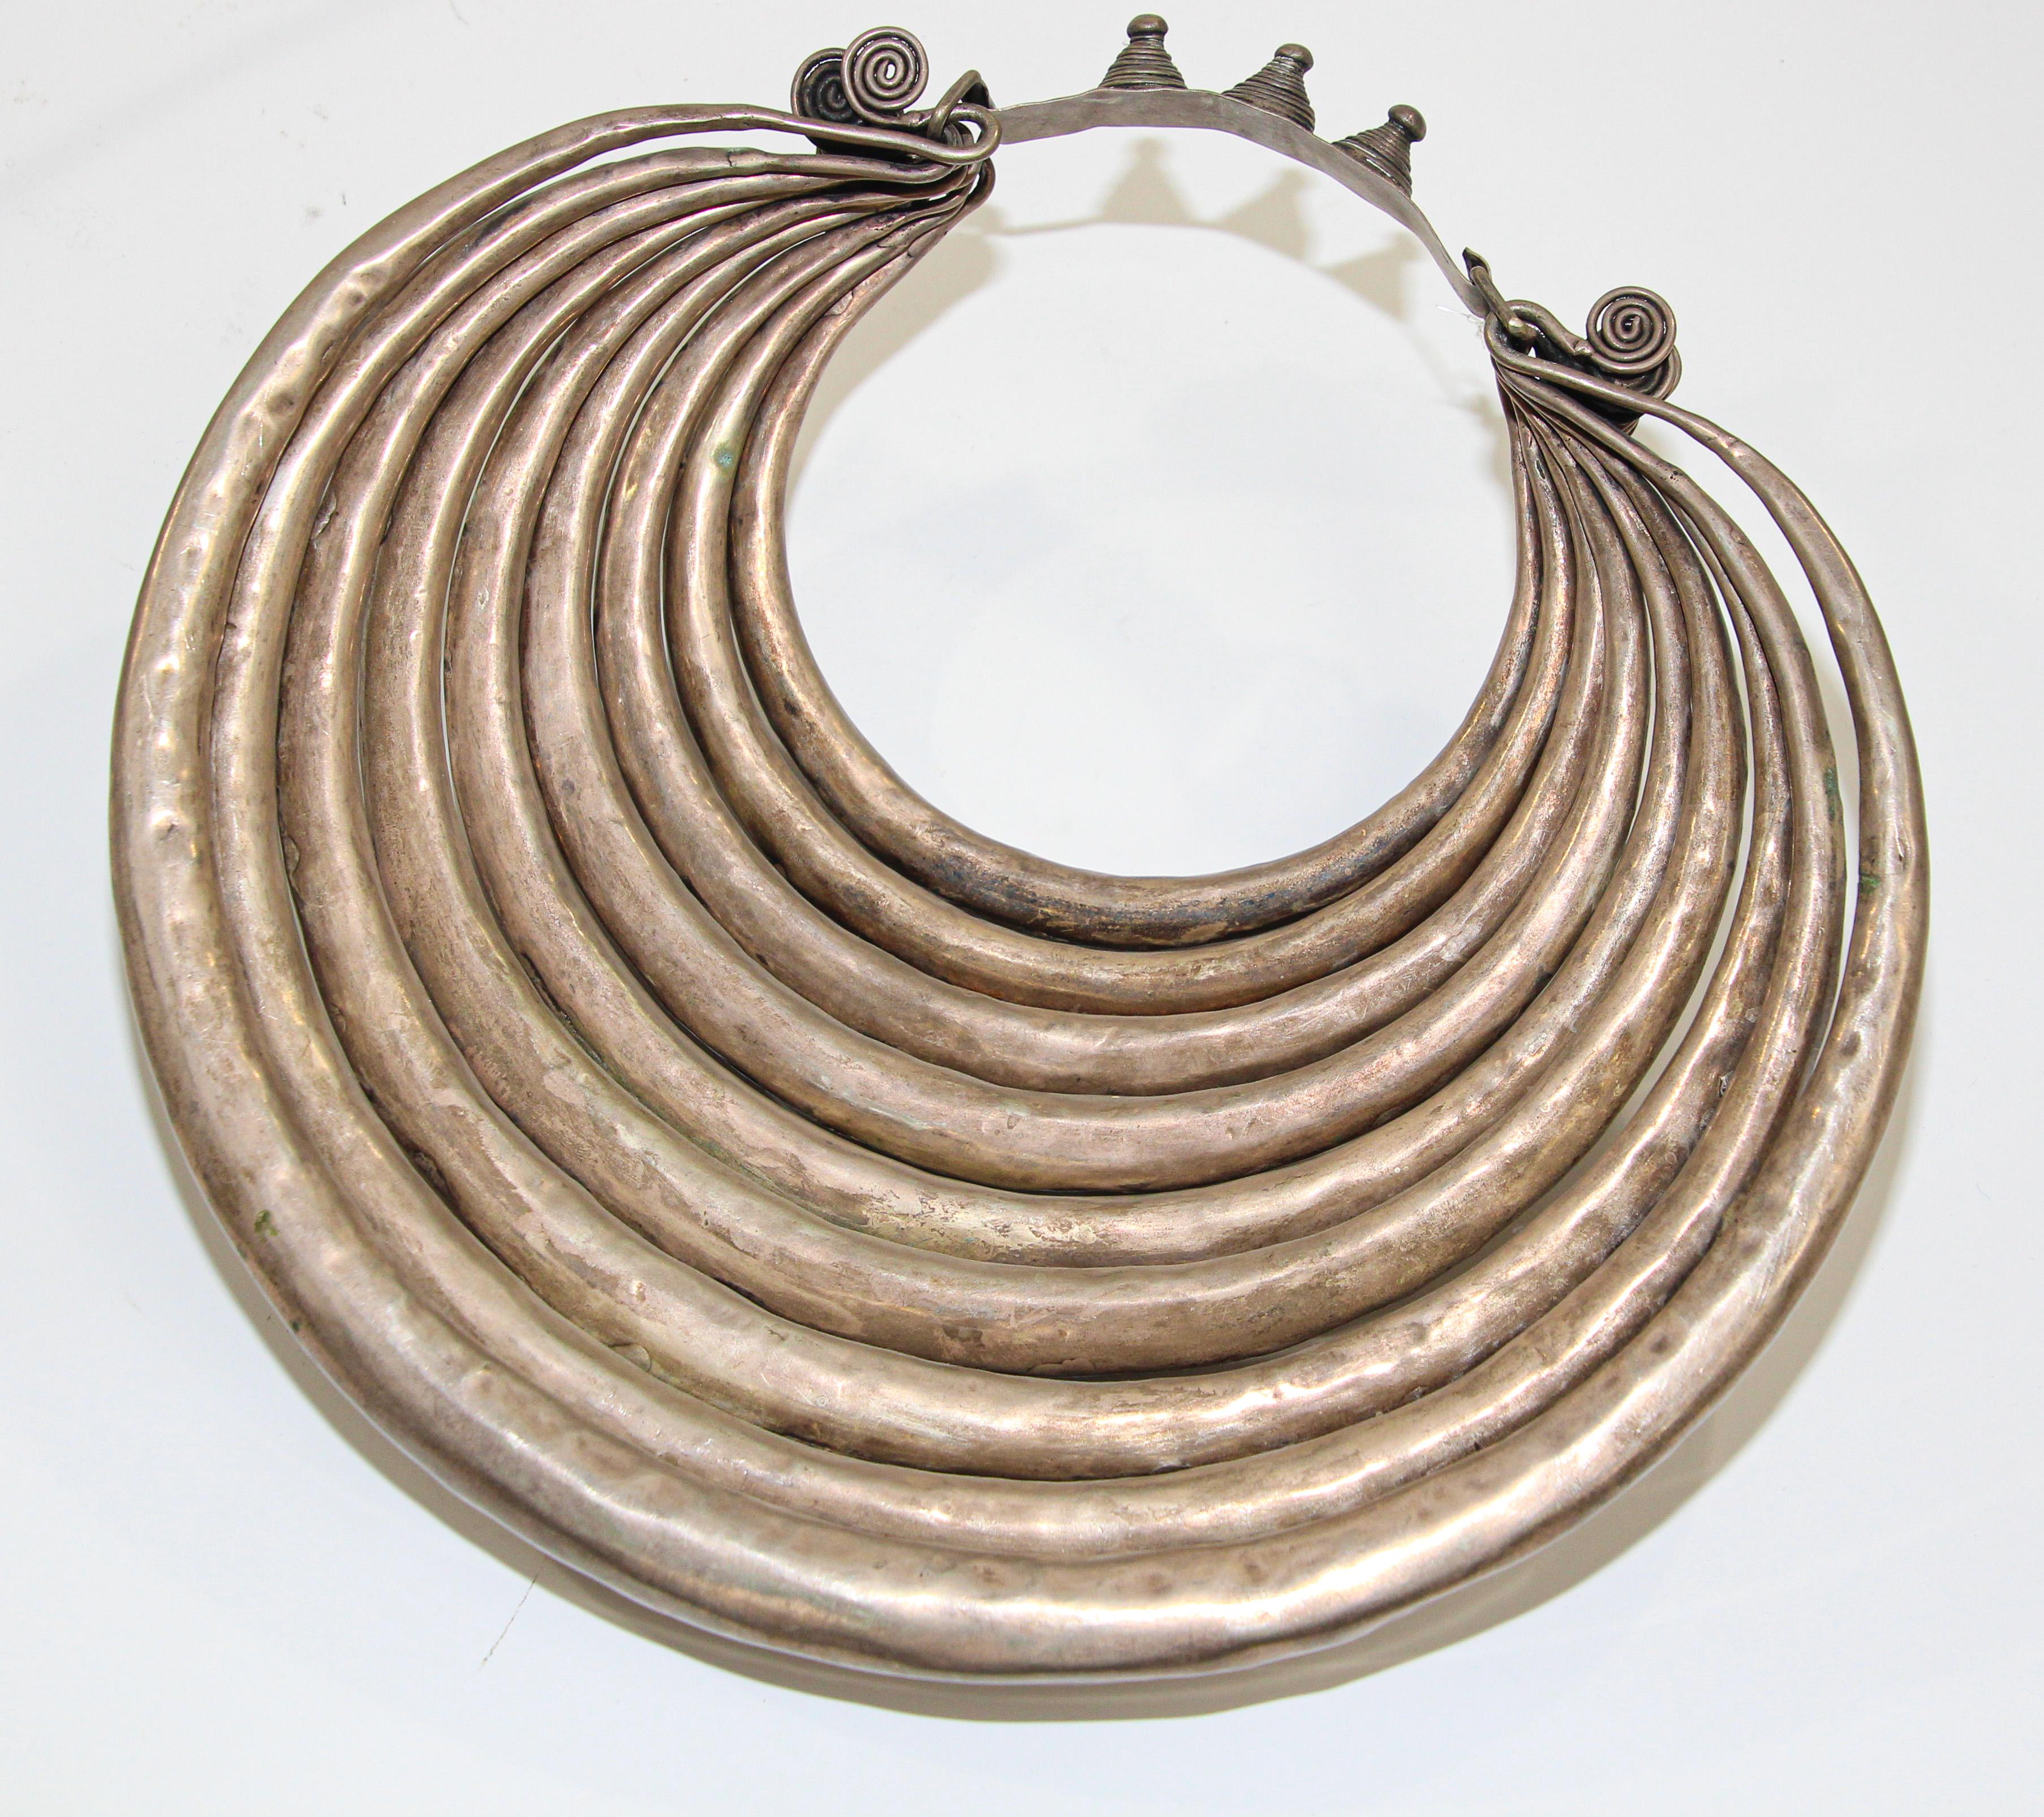 Vintage Miao Paktong Ceremonial Collar Necklace on Stand, Laos 1